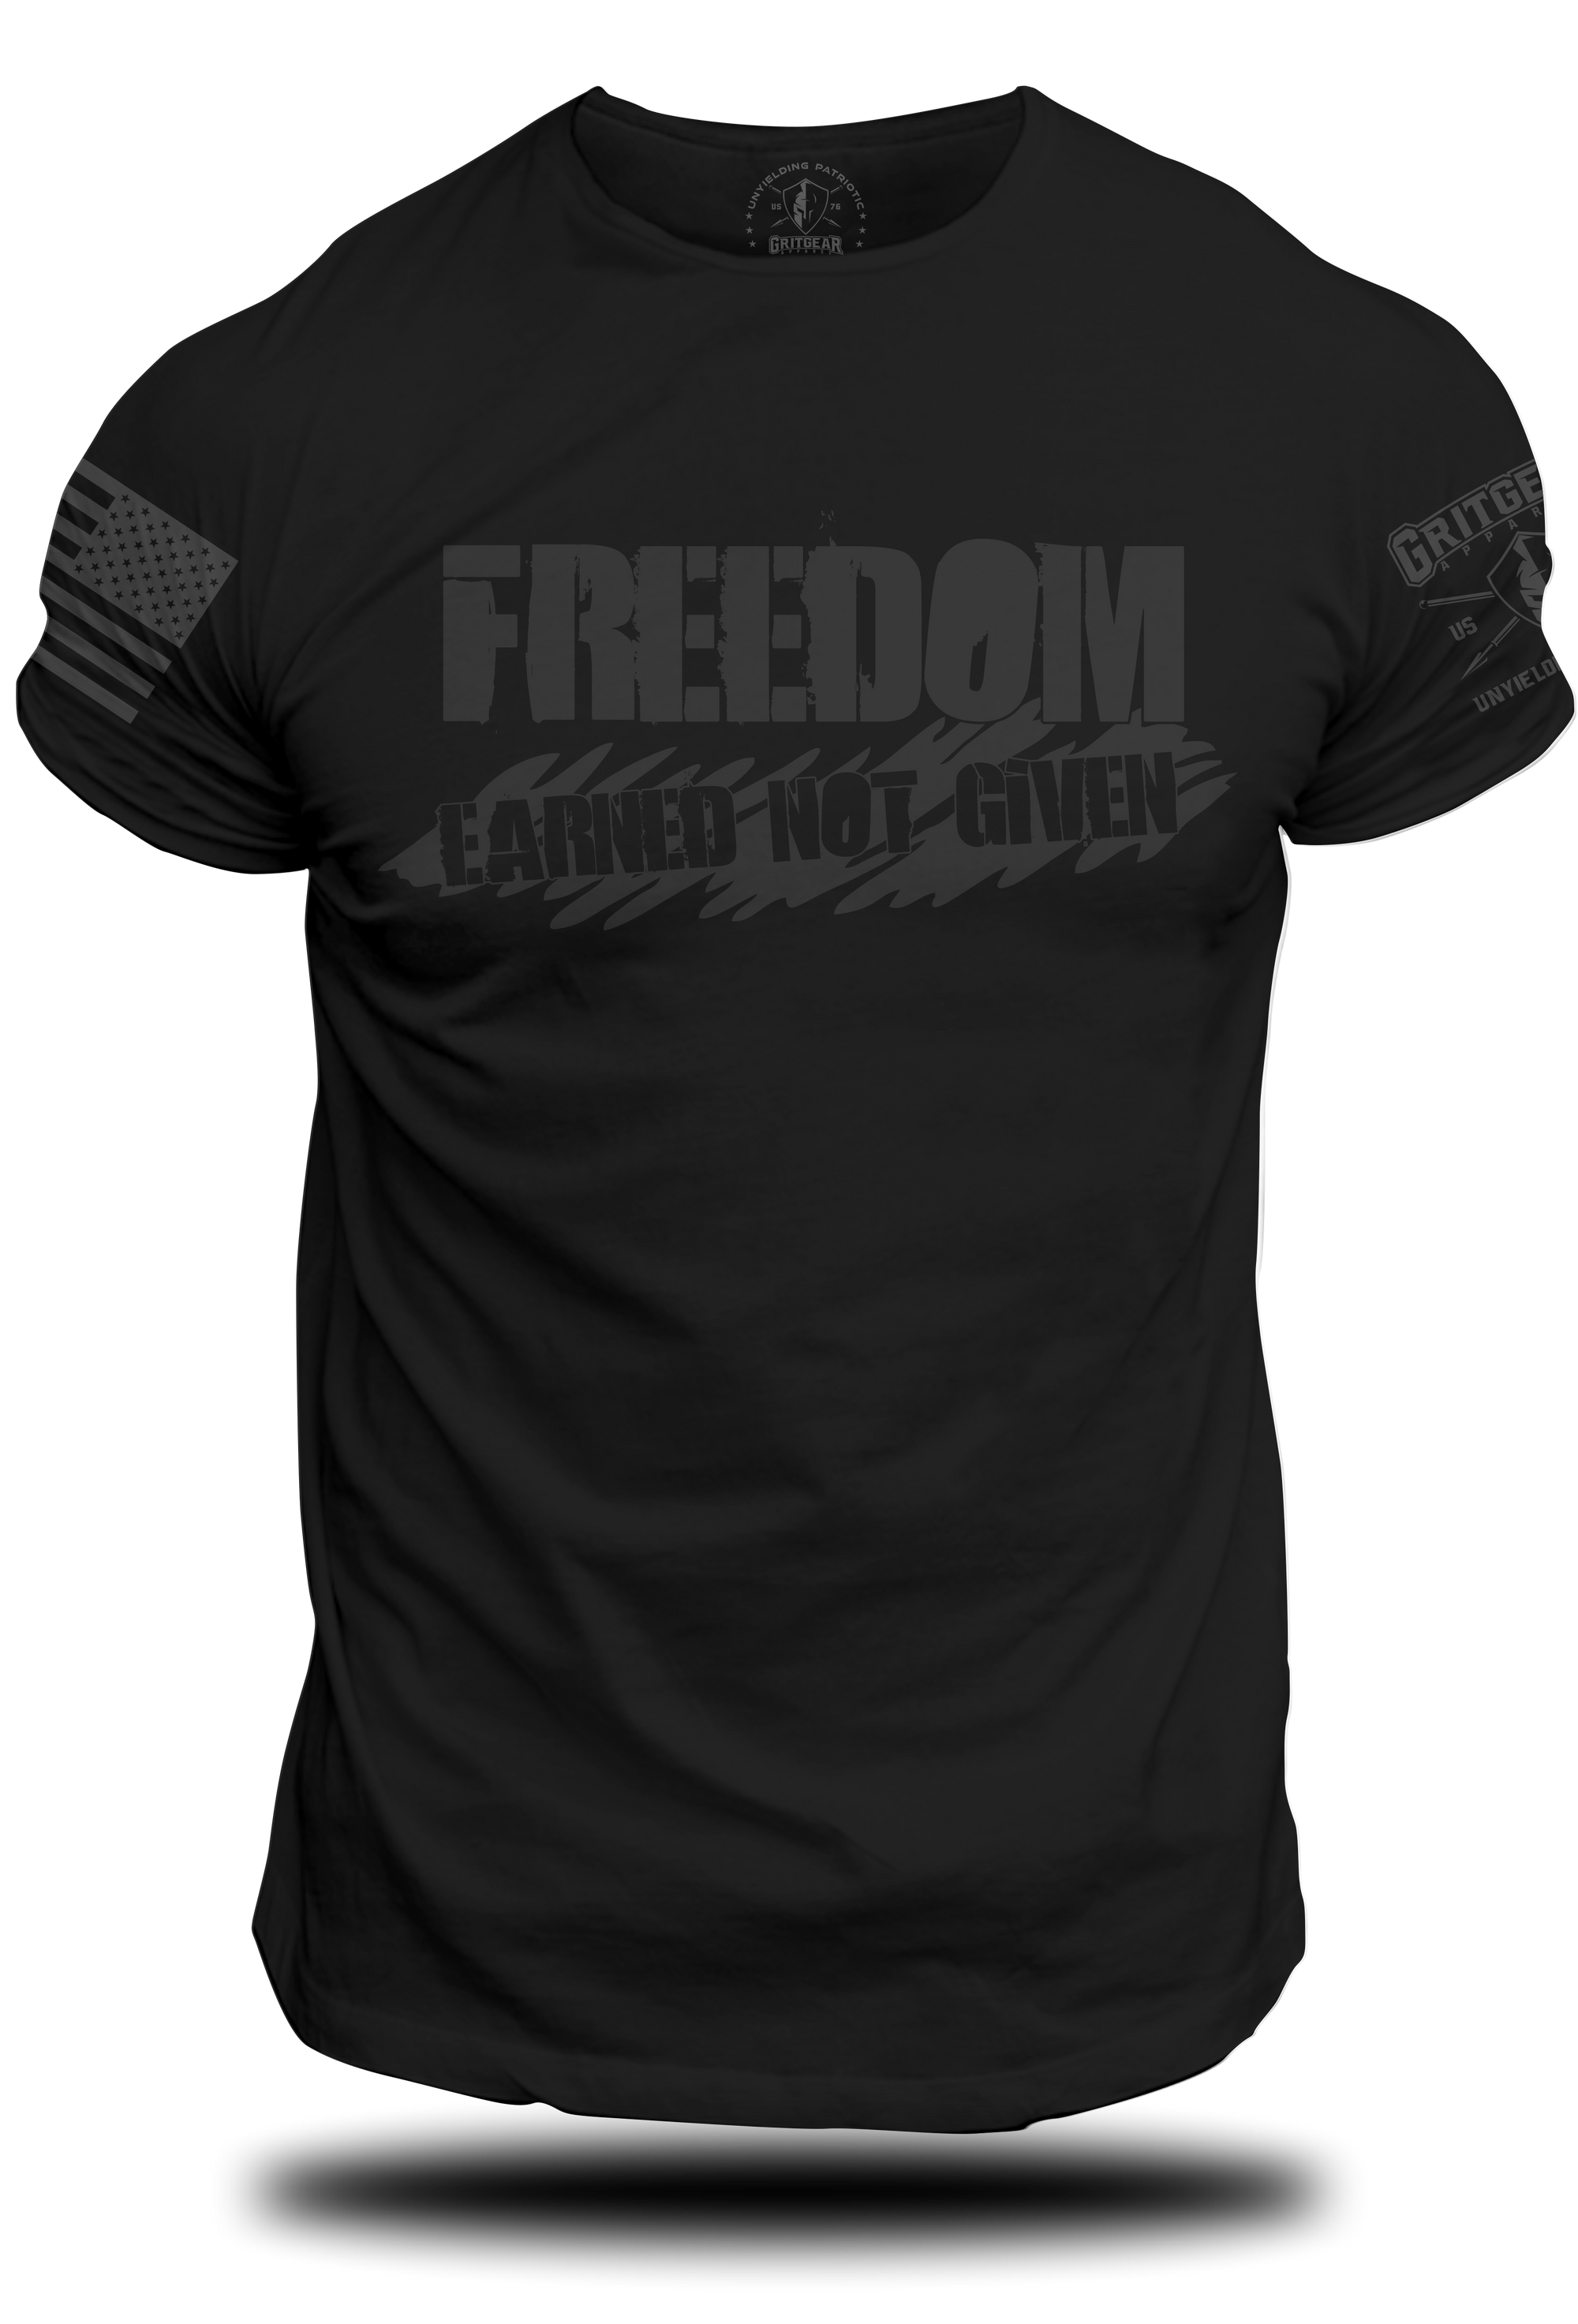 Freedom Earned Not Given T-Shirt | Grit Gear Apparel ®